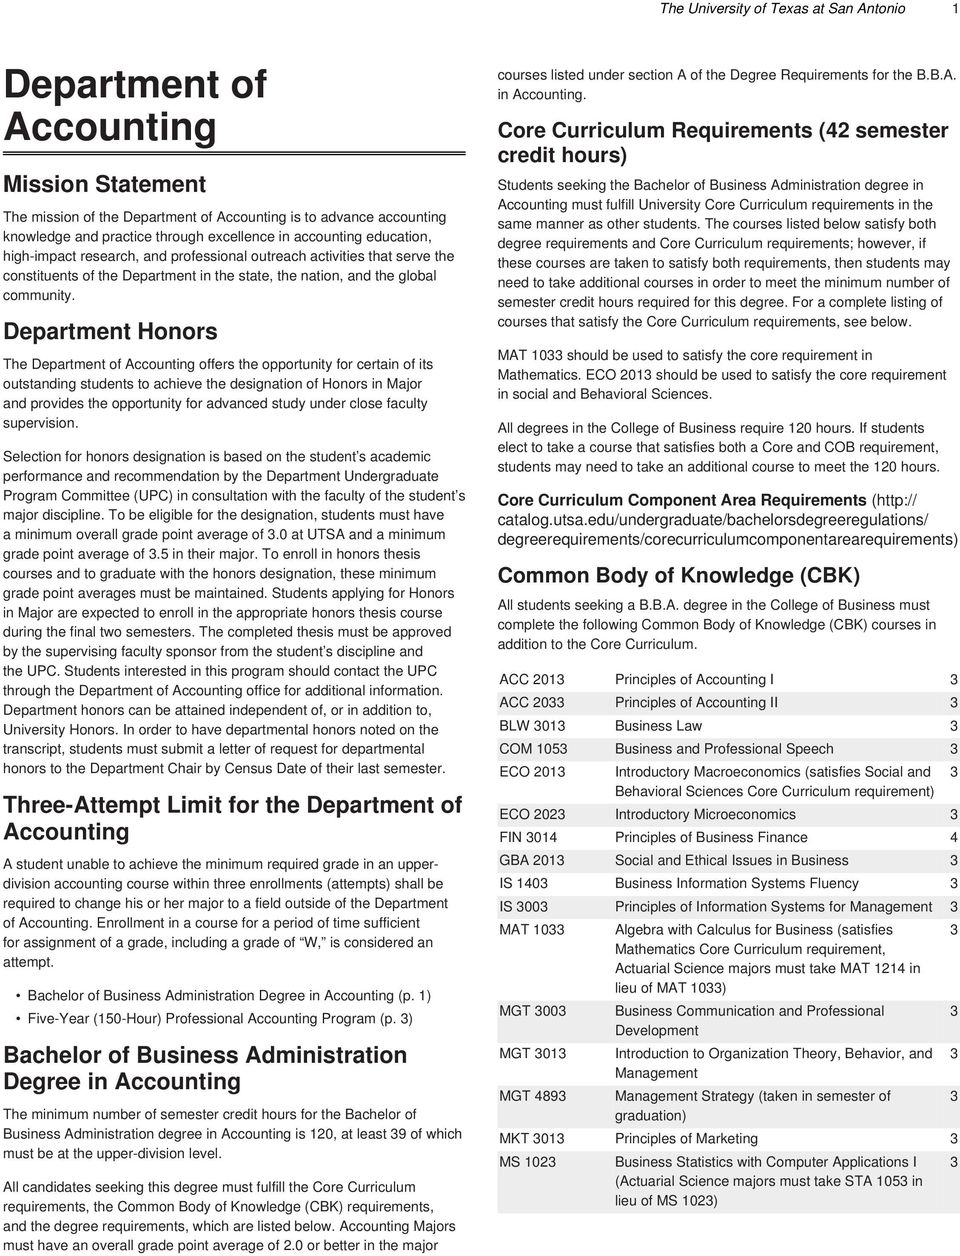 Department Honors The Department of offers the opportunity for certain of its outstanding students to achieve the designation of Honors in Major and provides the opportunity for advanced study under